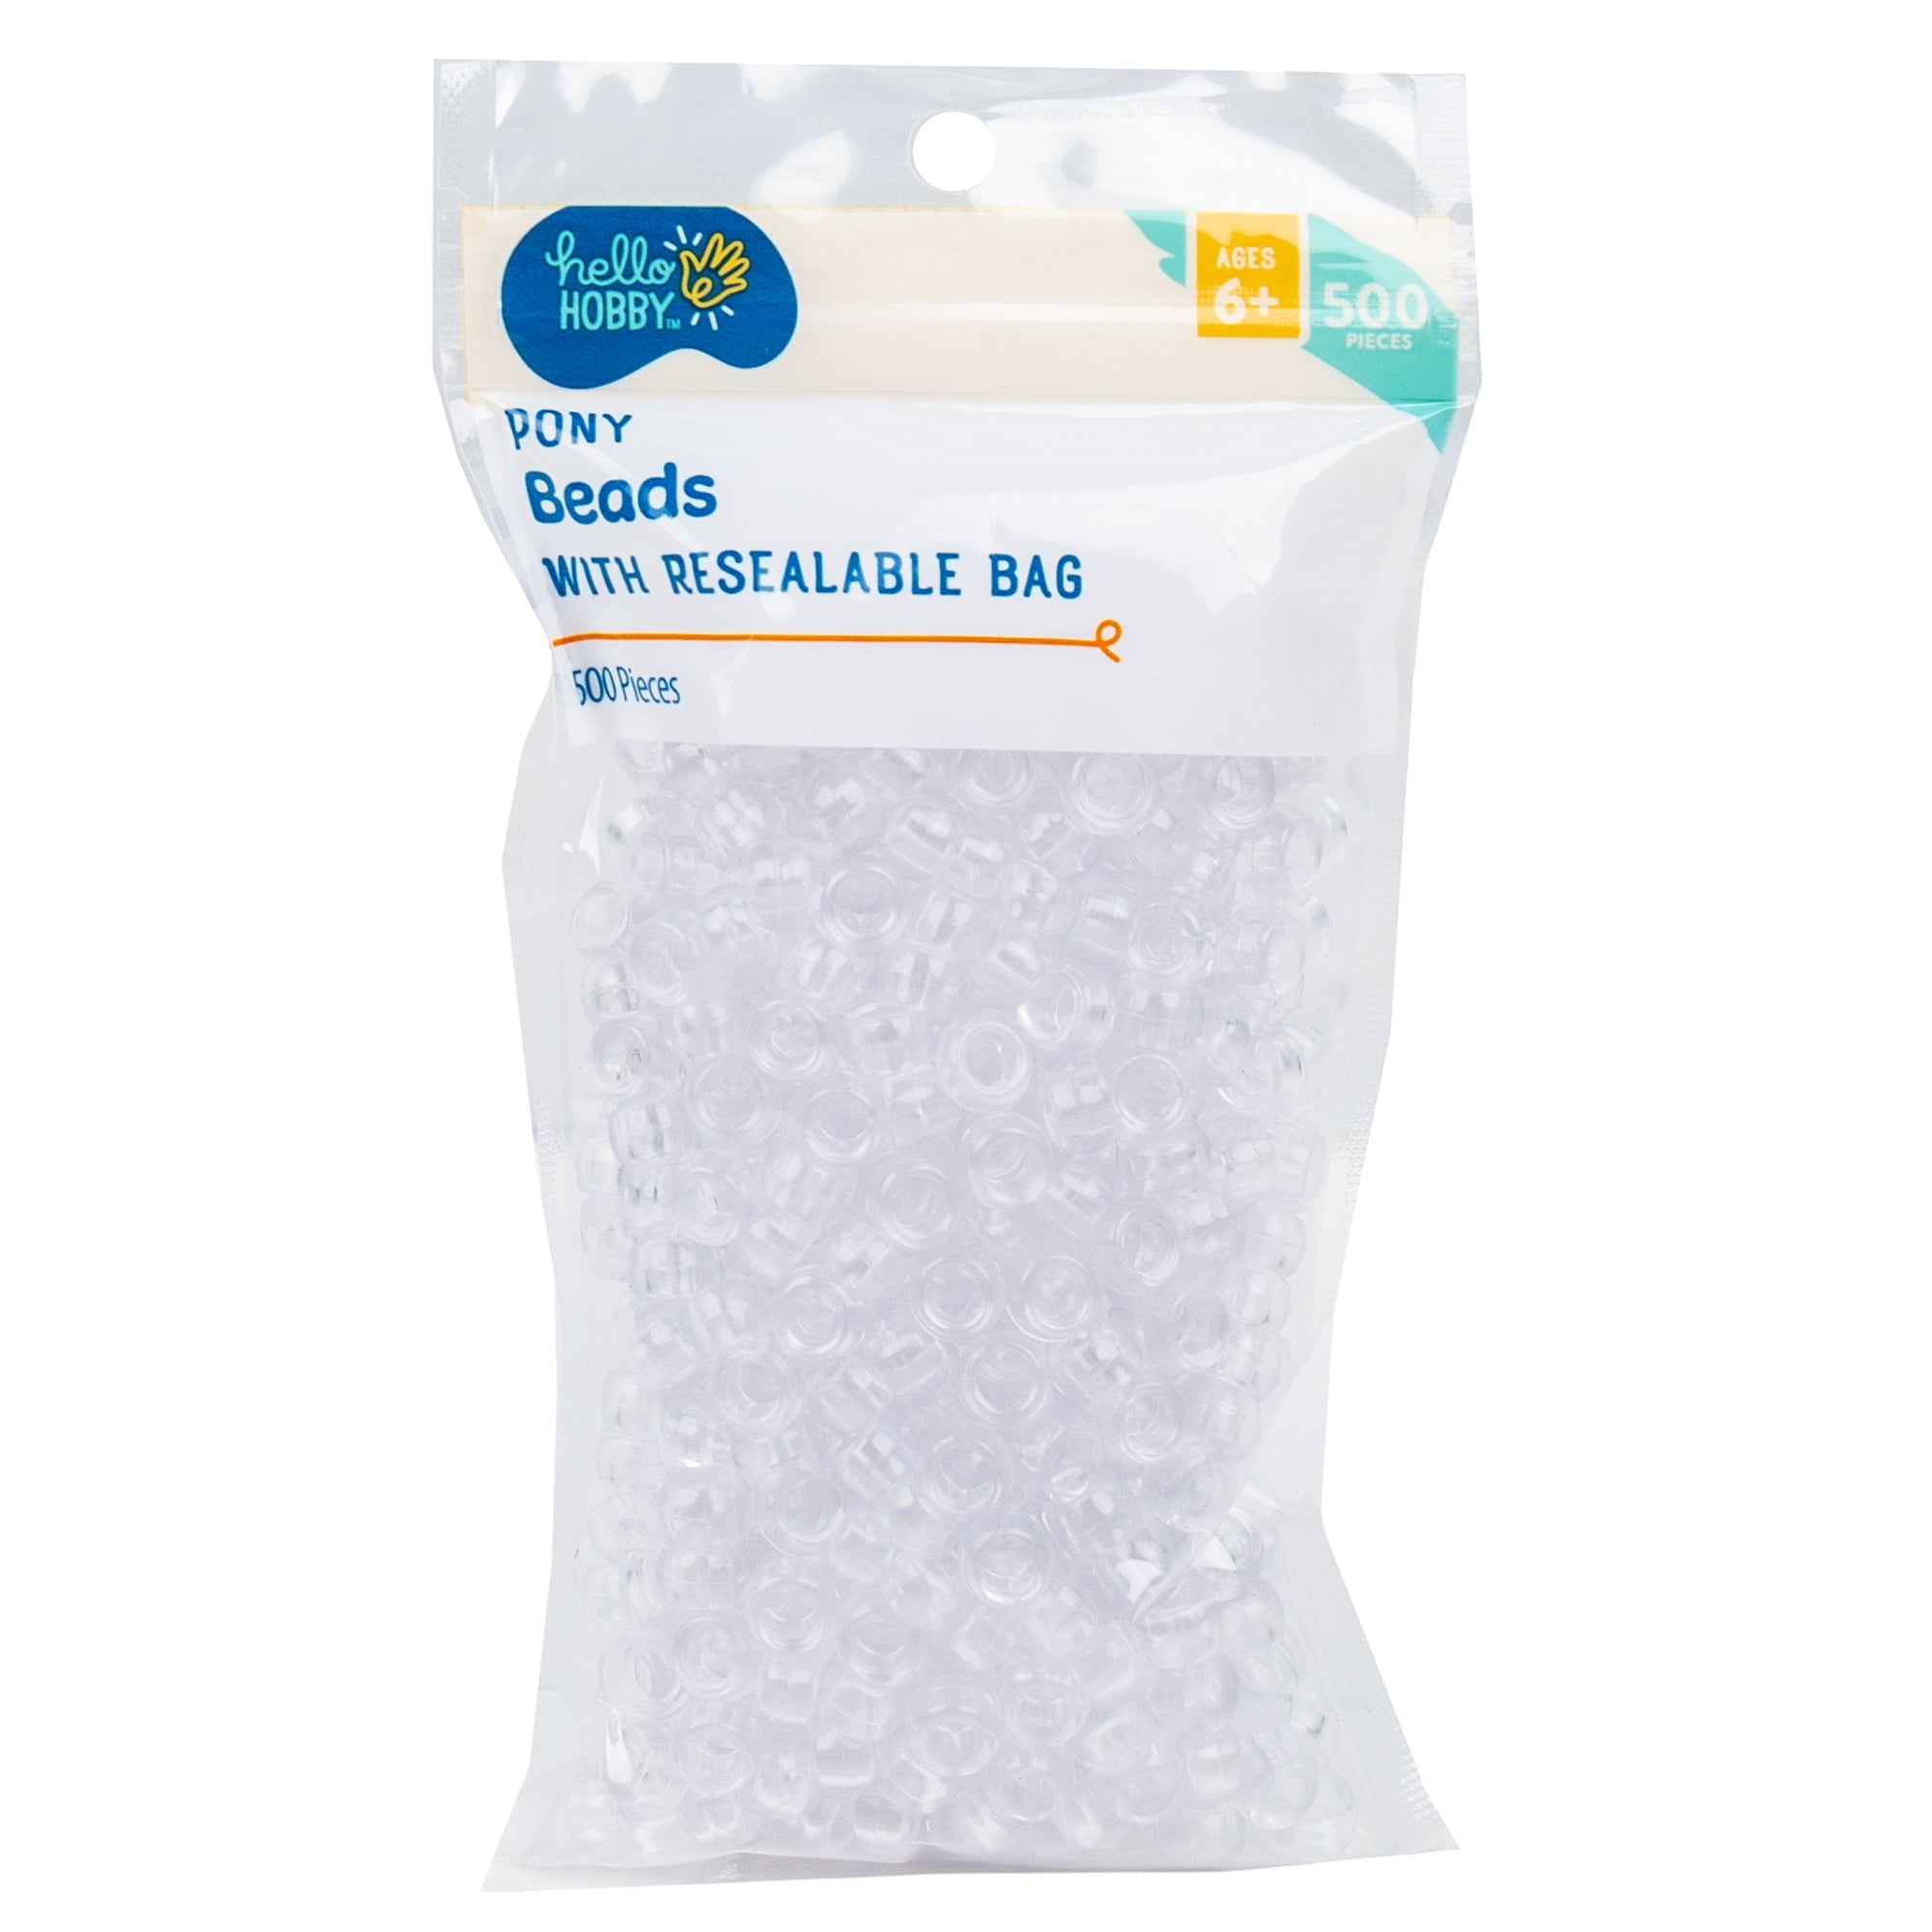 Hello Hobby Pony Beads, Clear, 500-Pack